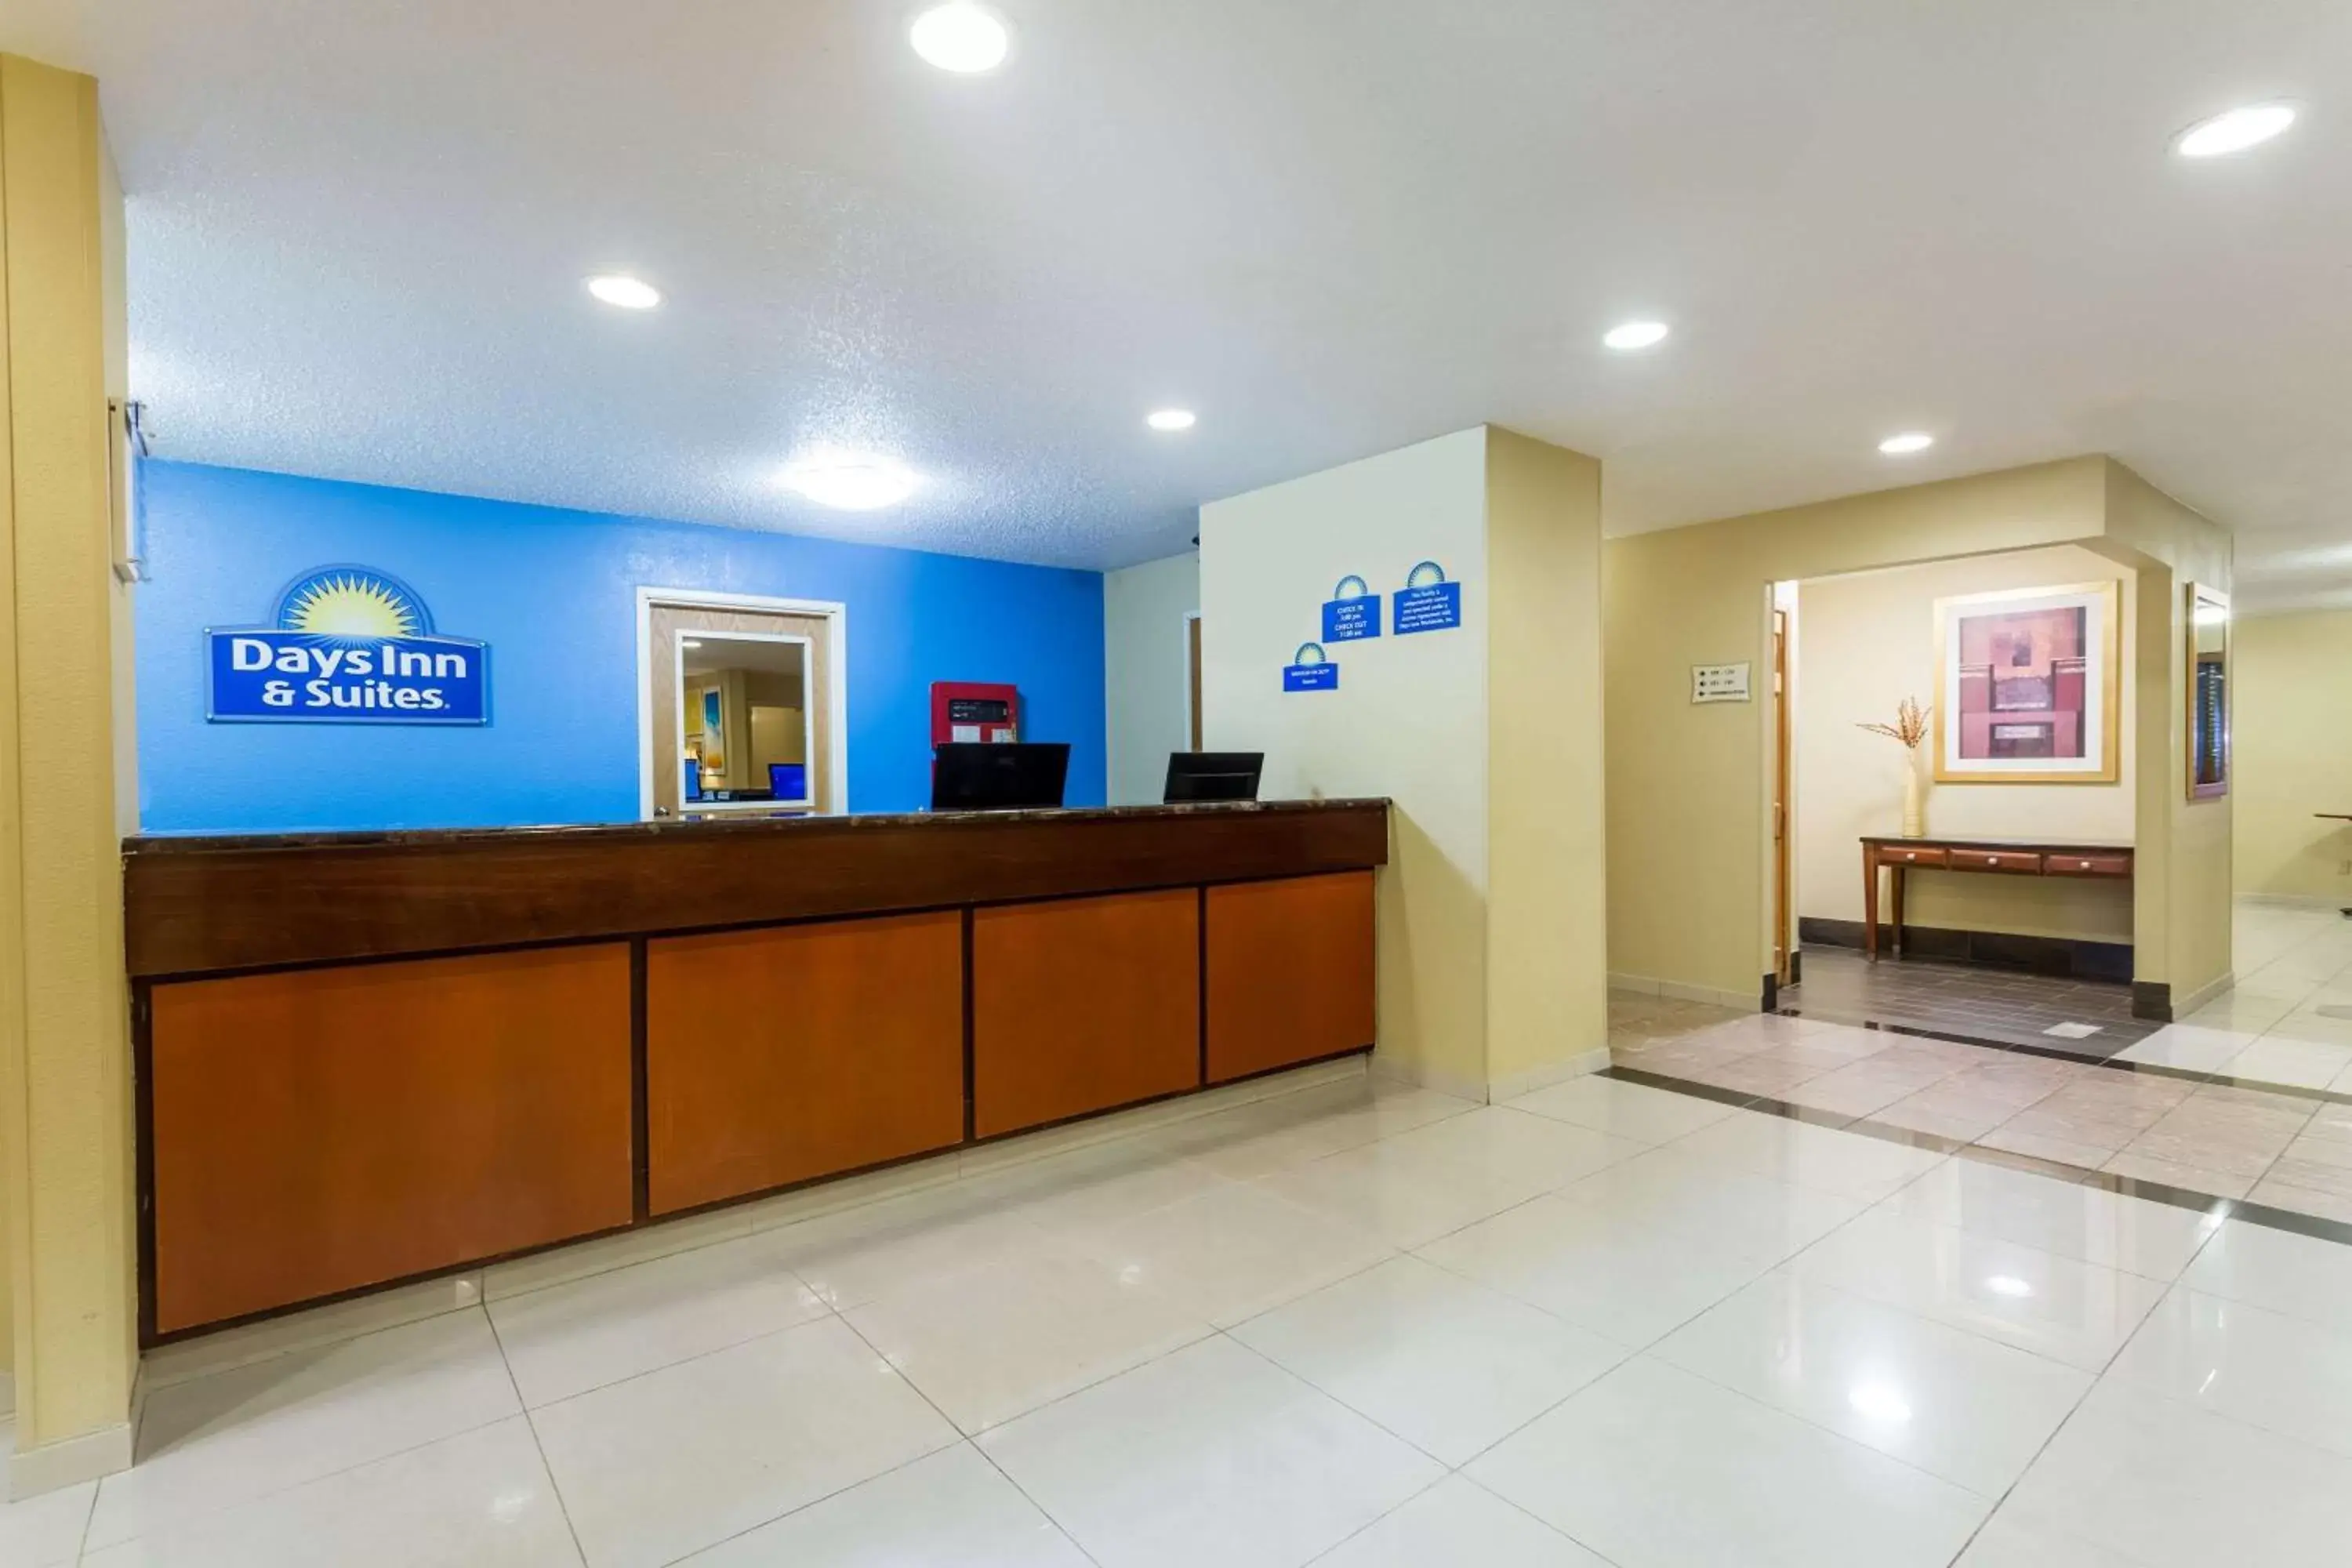 Lobby or reception, Lobby/Reception in Days Inn & Suites by Wyndham Bloomington/Normal IL